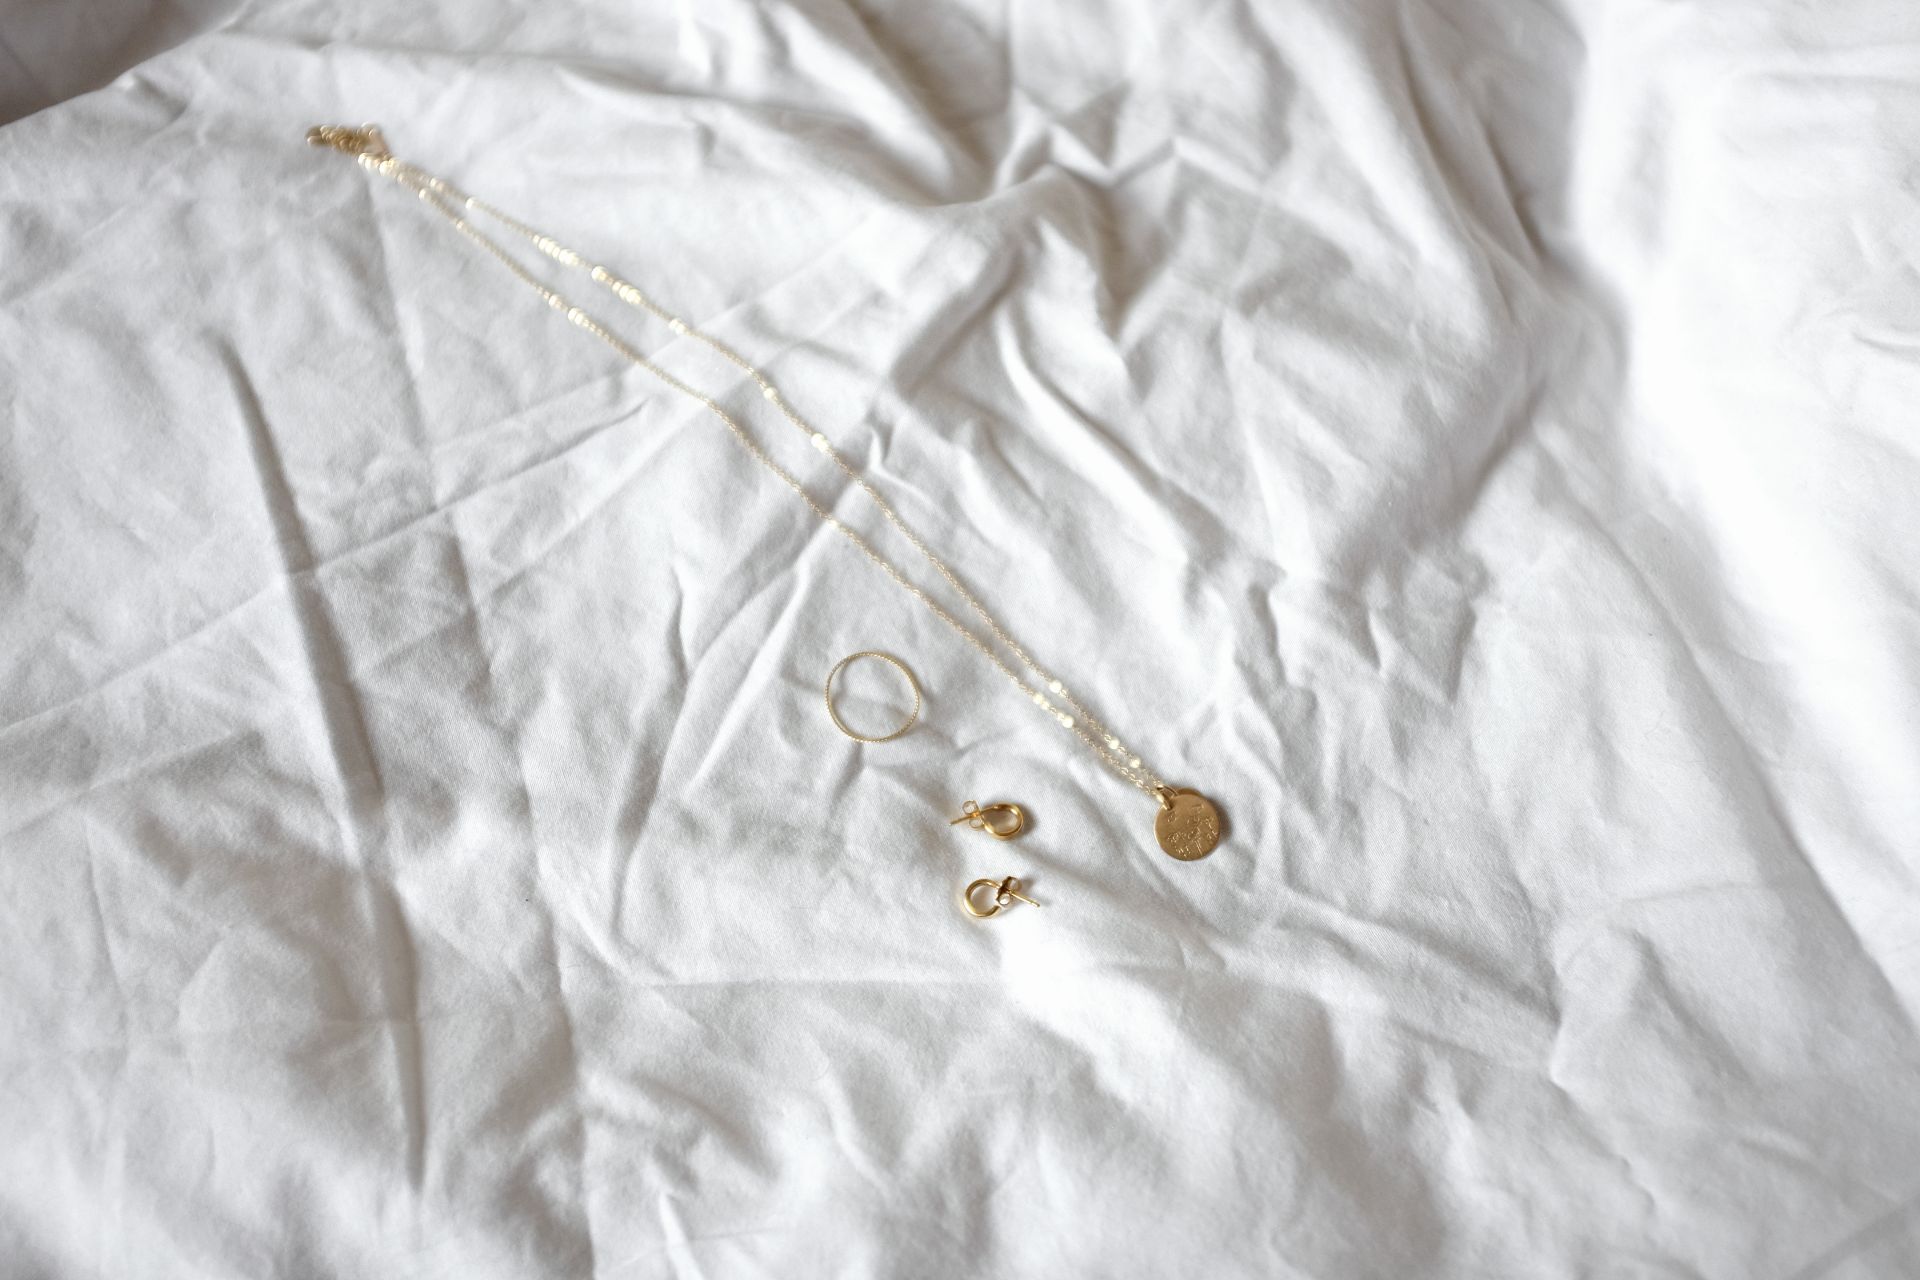 A gold necklace, ring, and pair of earrings sit on a white sheet